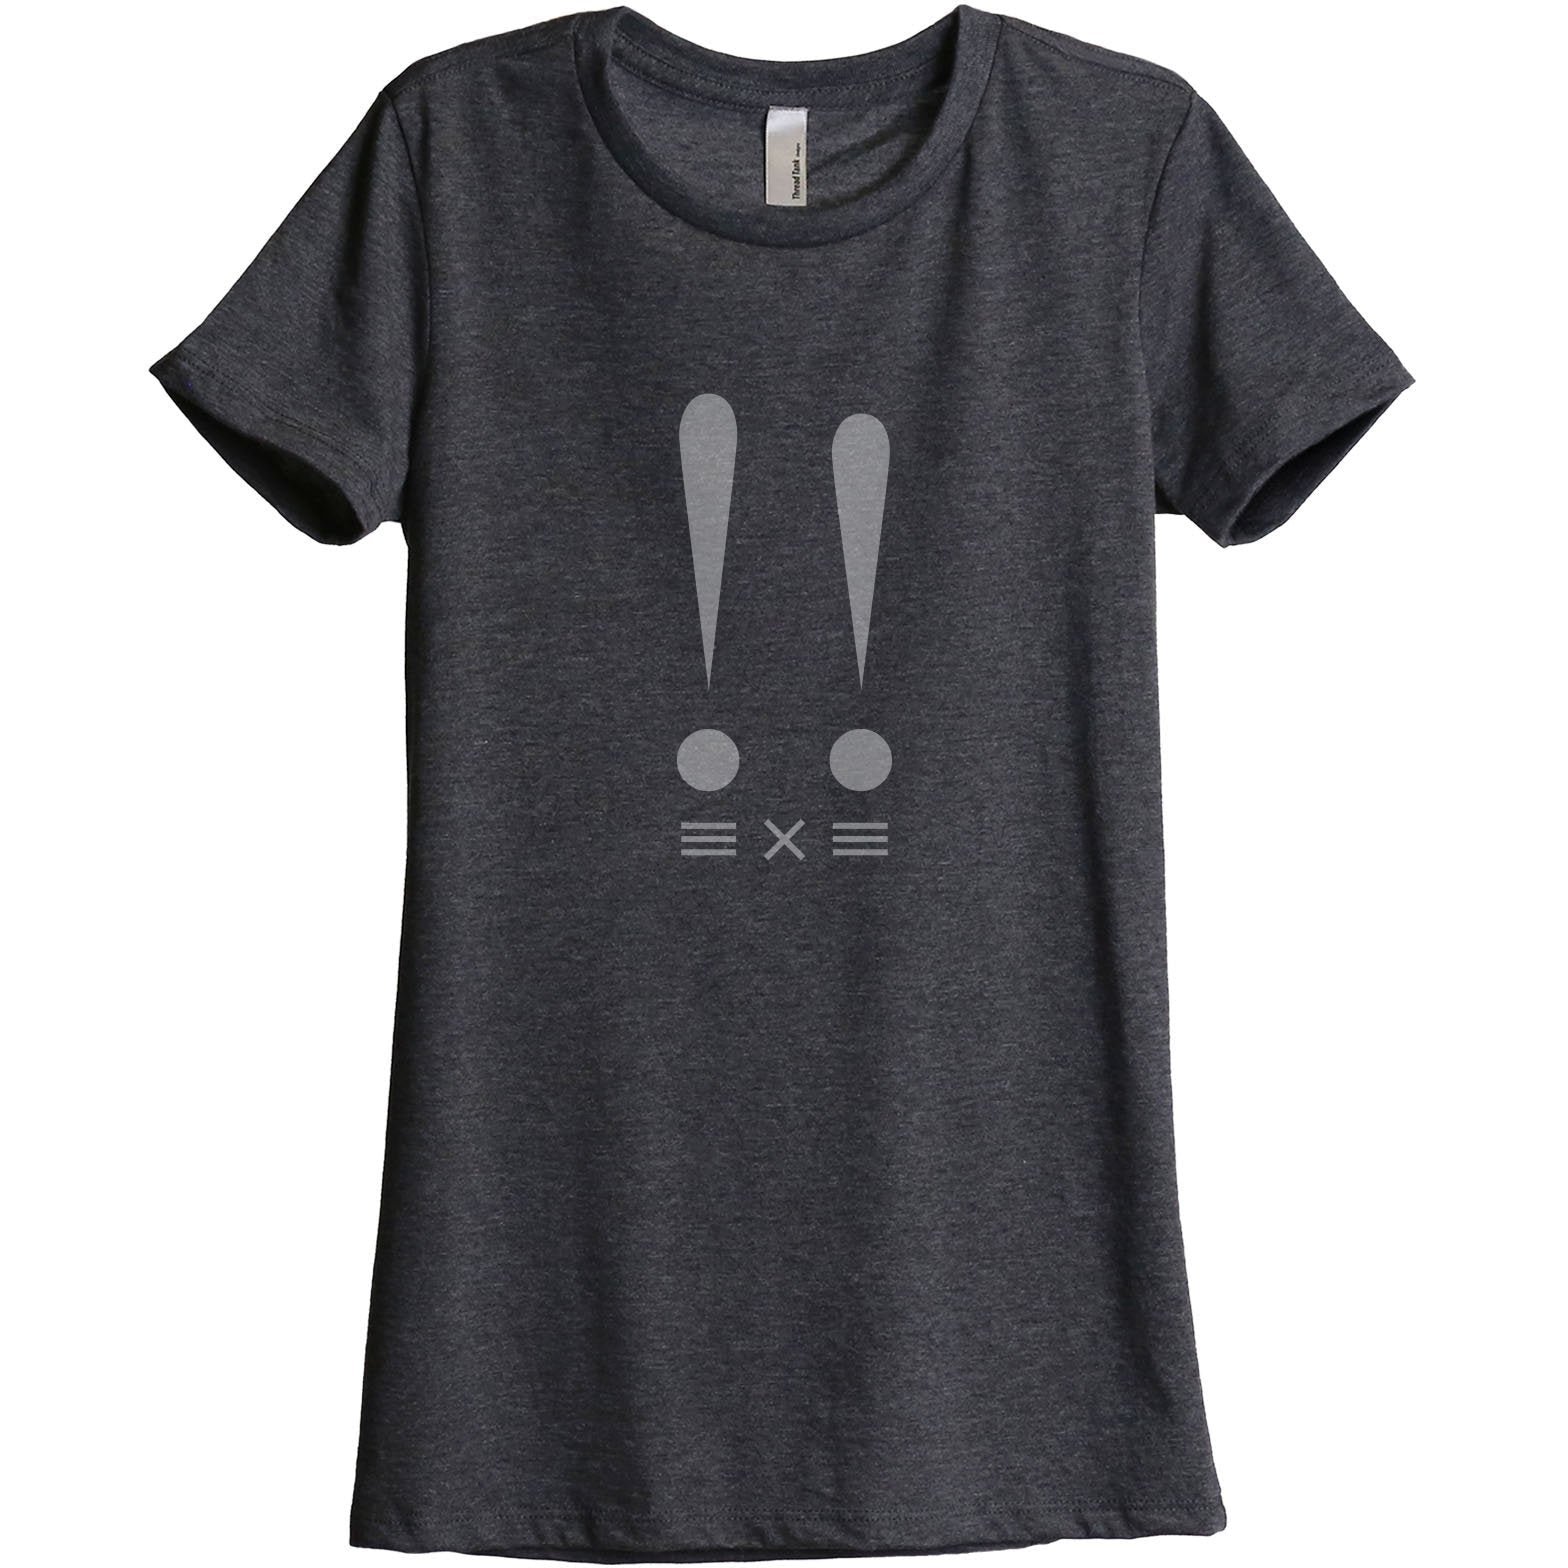 Bunny Mark - Thread Tank | Stories You Can Wear | T-Shirts, Tank Tops and Sweatshirts